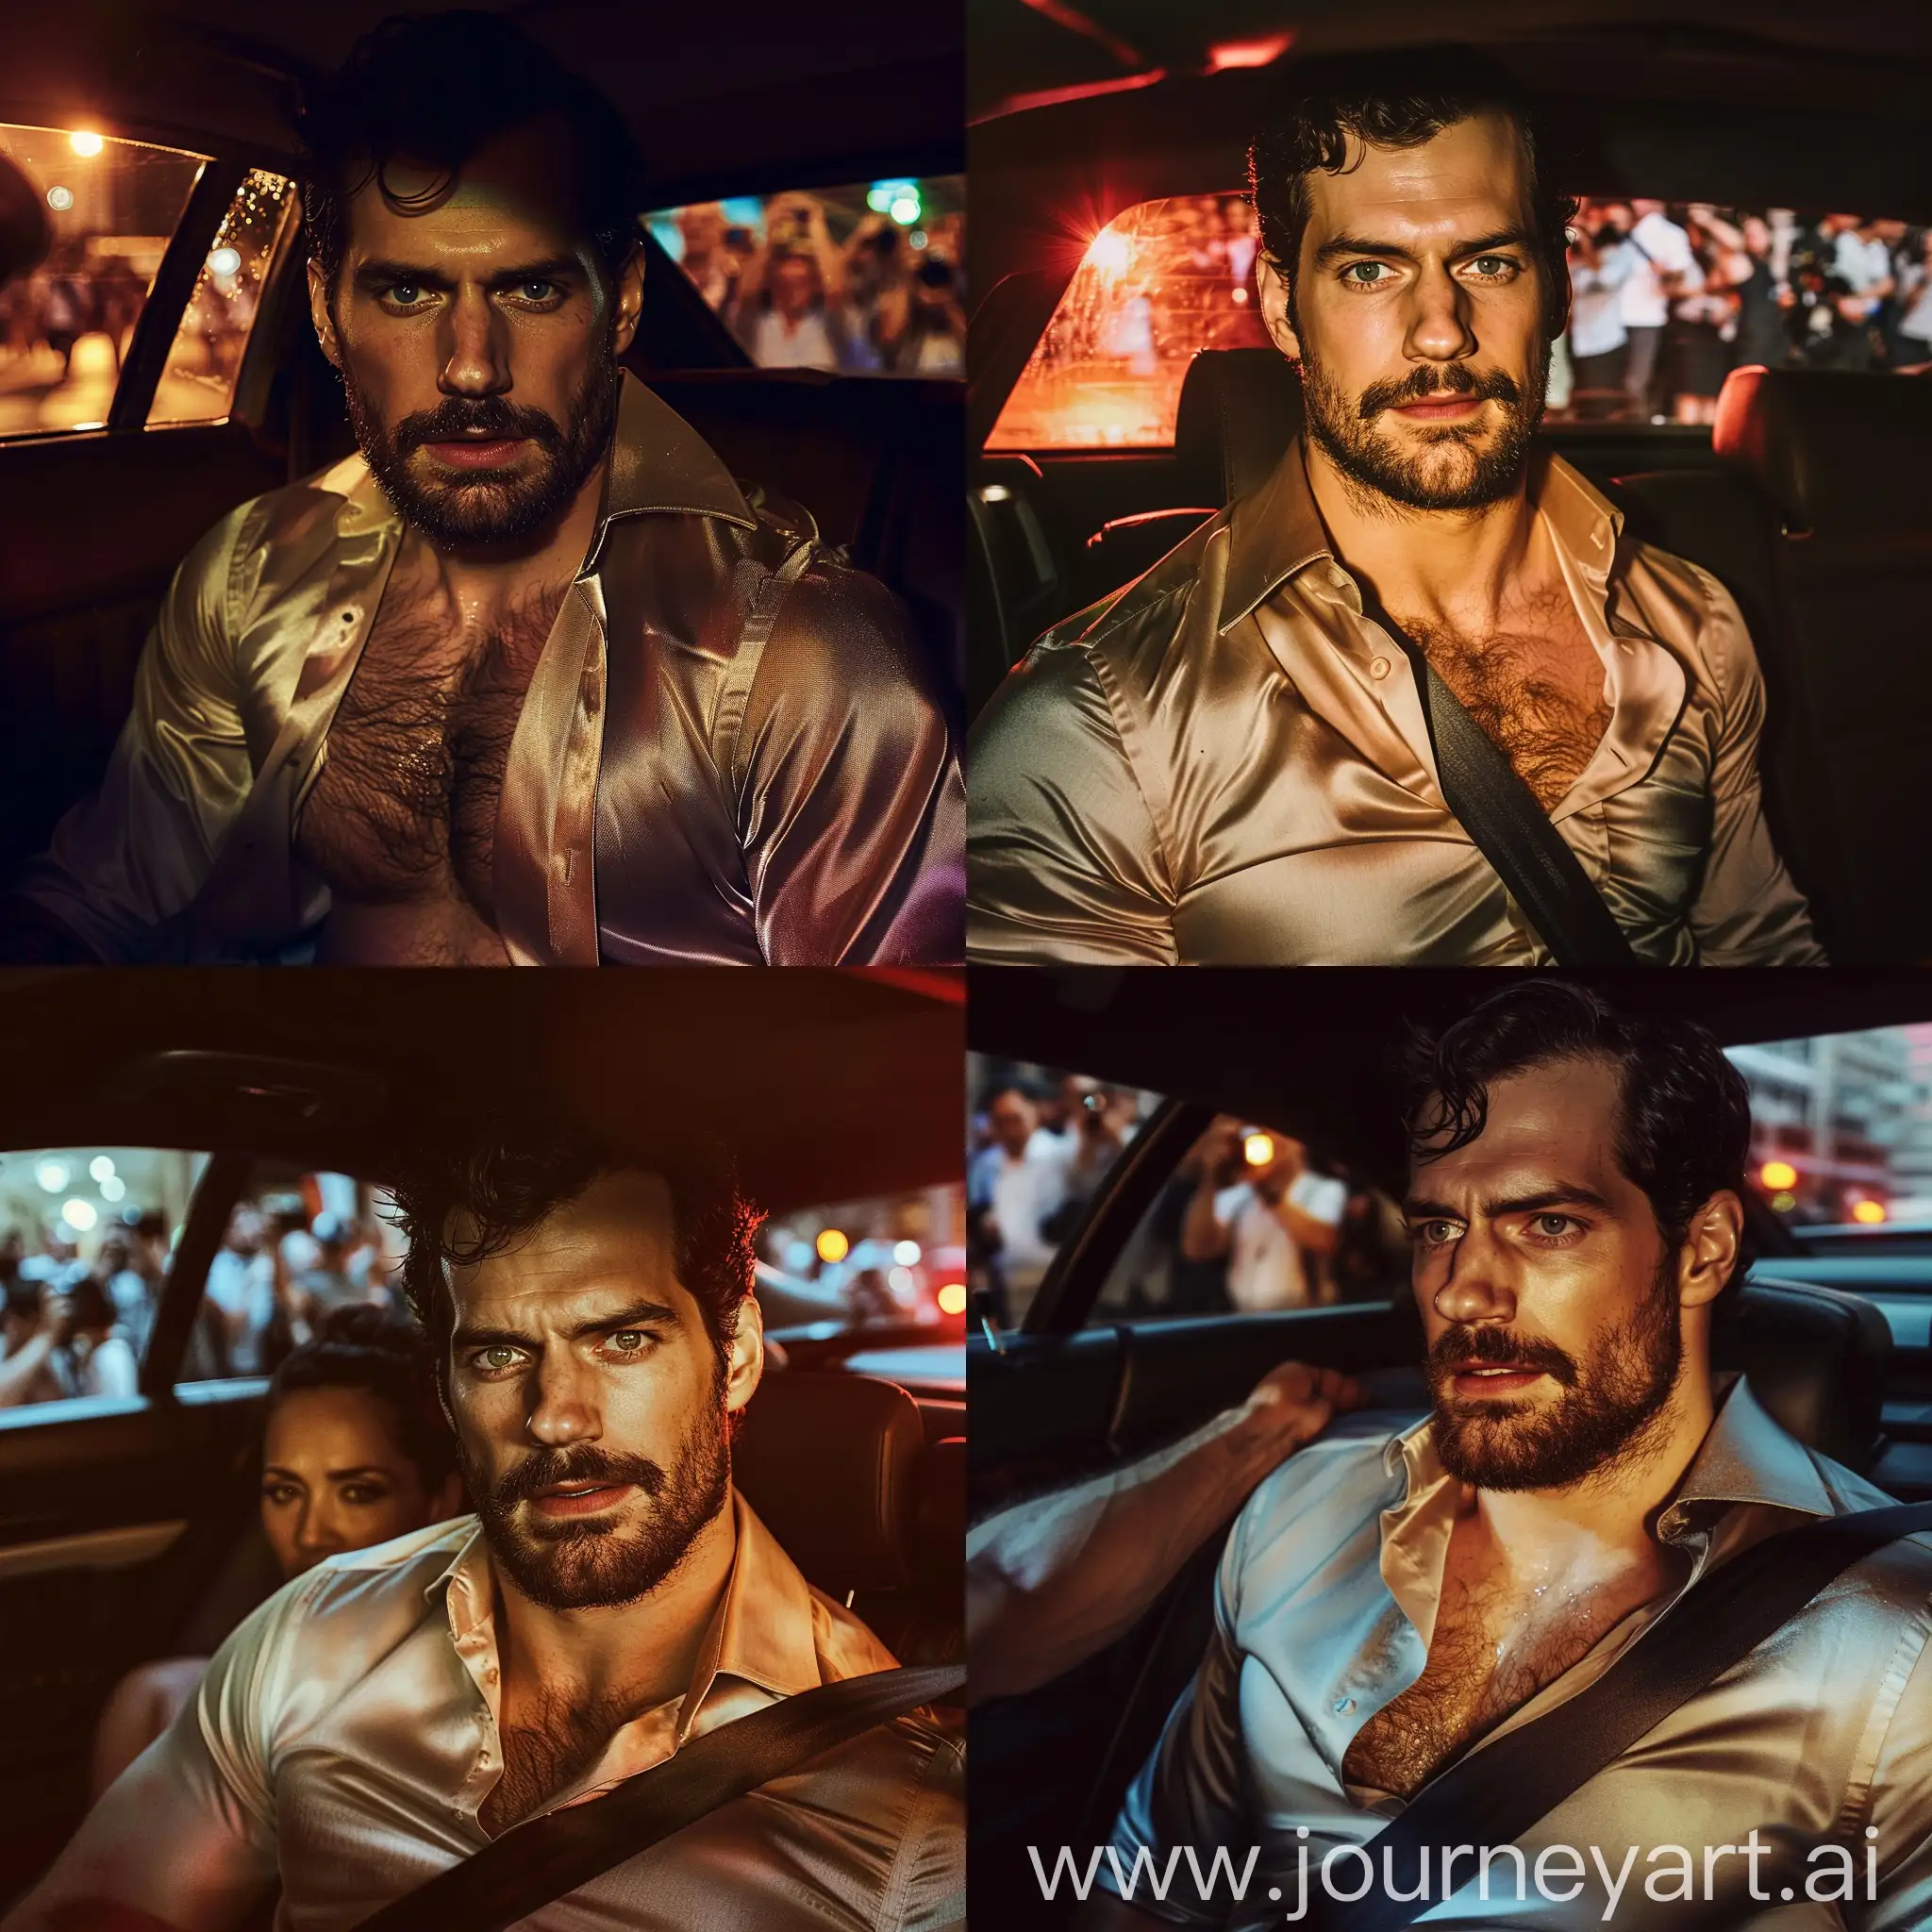 Film lighting, handsome face of actor Henry Cavill, a muscular and burly man in the back seat of the car, wearing a dress shirt, open shirt, fit male torso, hairy chest, handsome bearded Henry Cavill inside a car, dim lighting, sweaty skin and bright, blurred paparazzi background outside the car